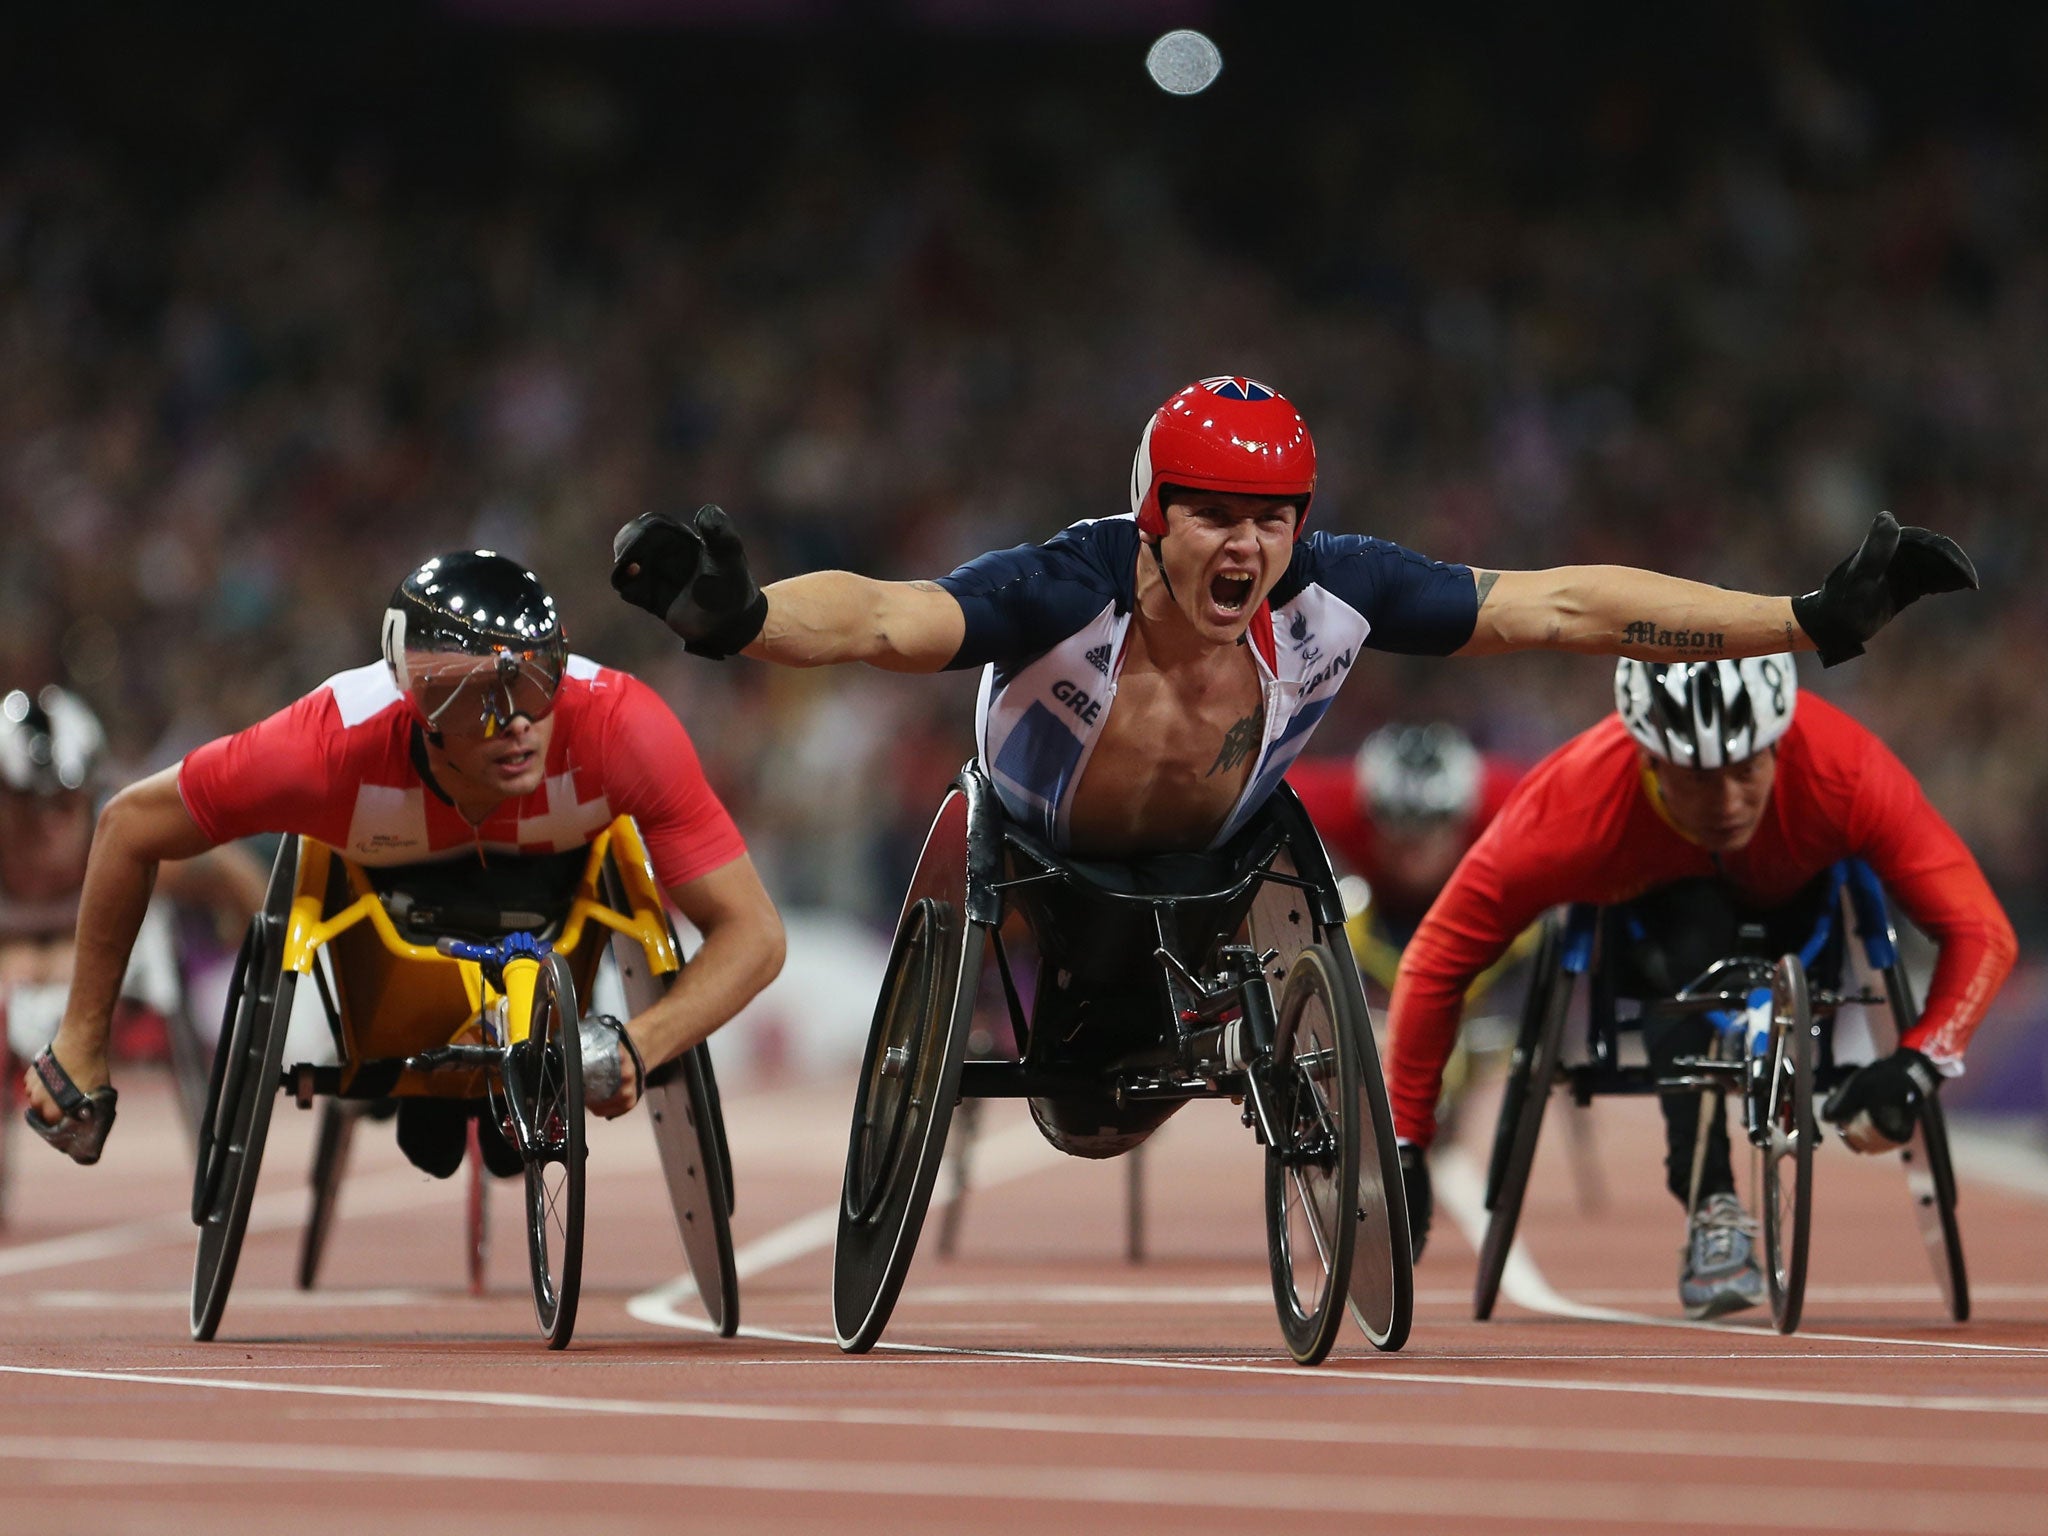 David Weir was one of the main paralympic stars of London 2012